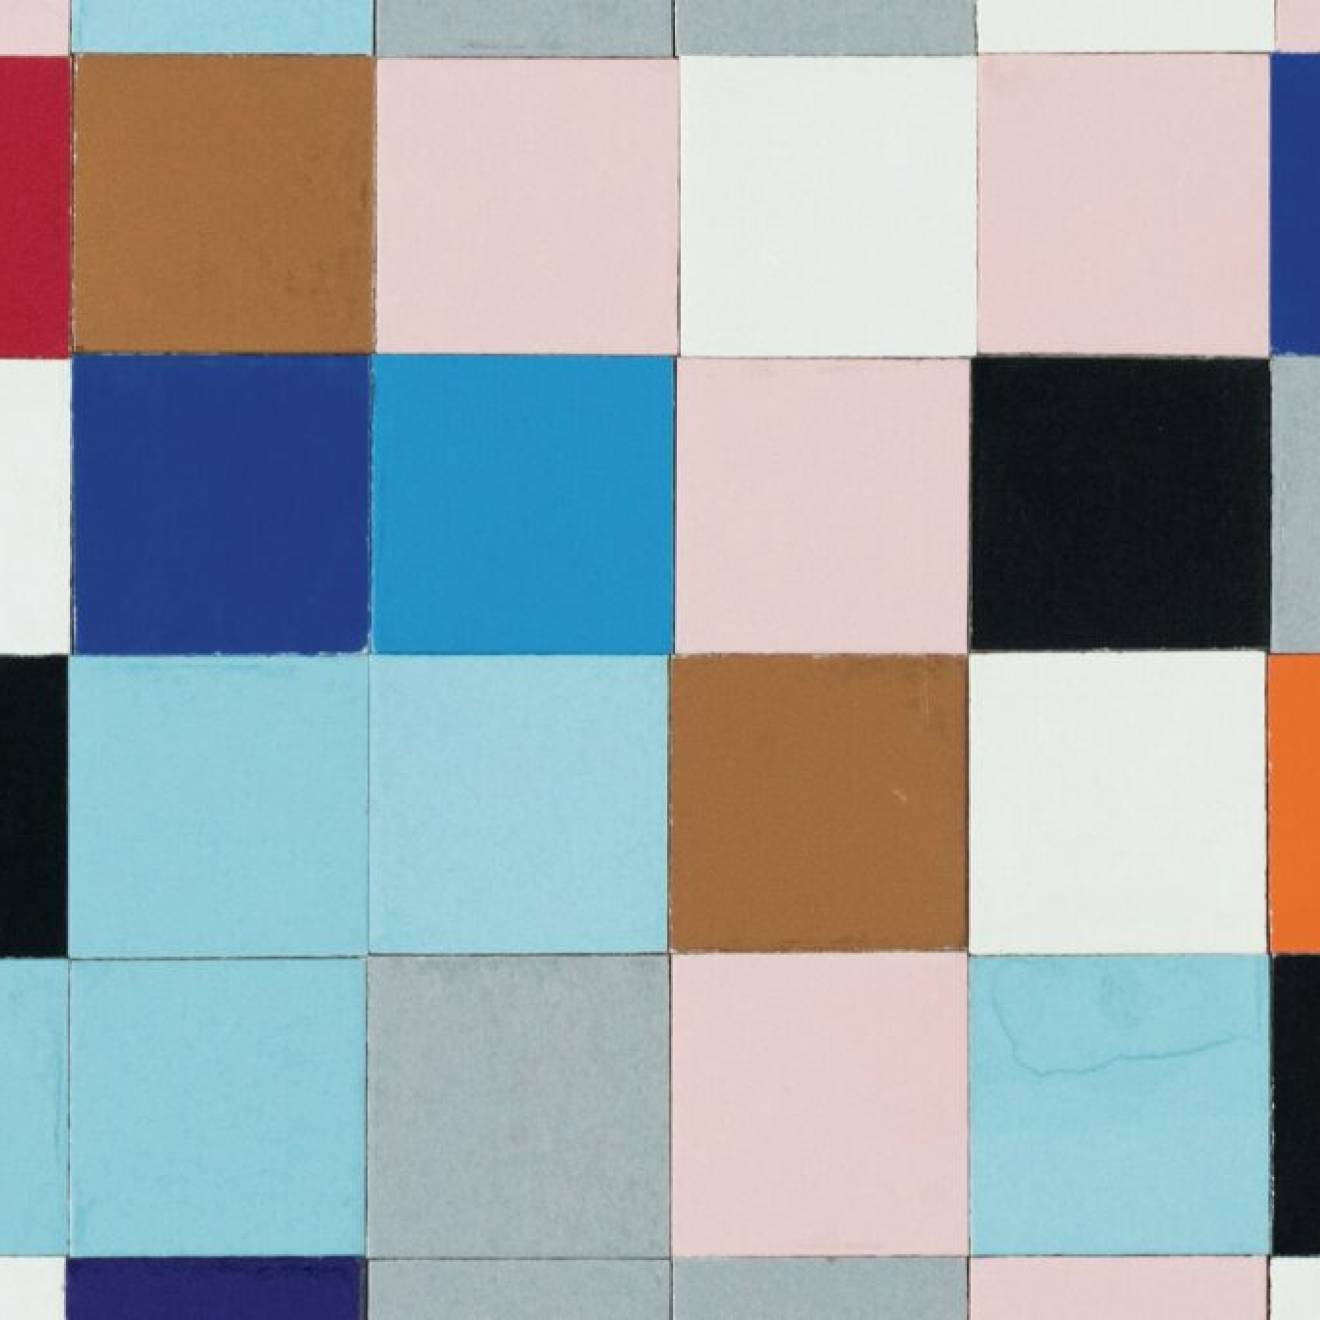 A grid of square tiles of different colors in a muted palette, in a seemingly random arrangement